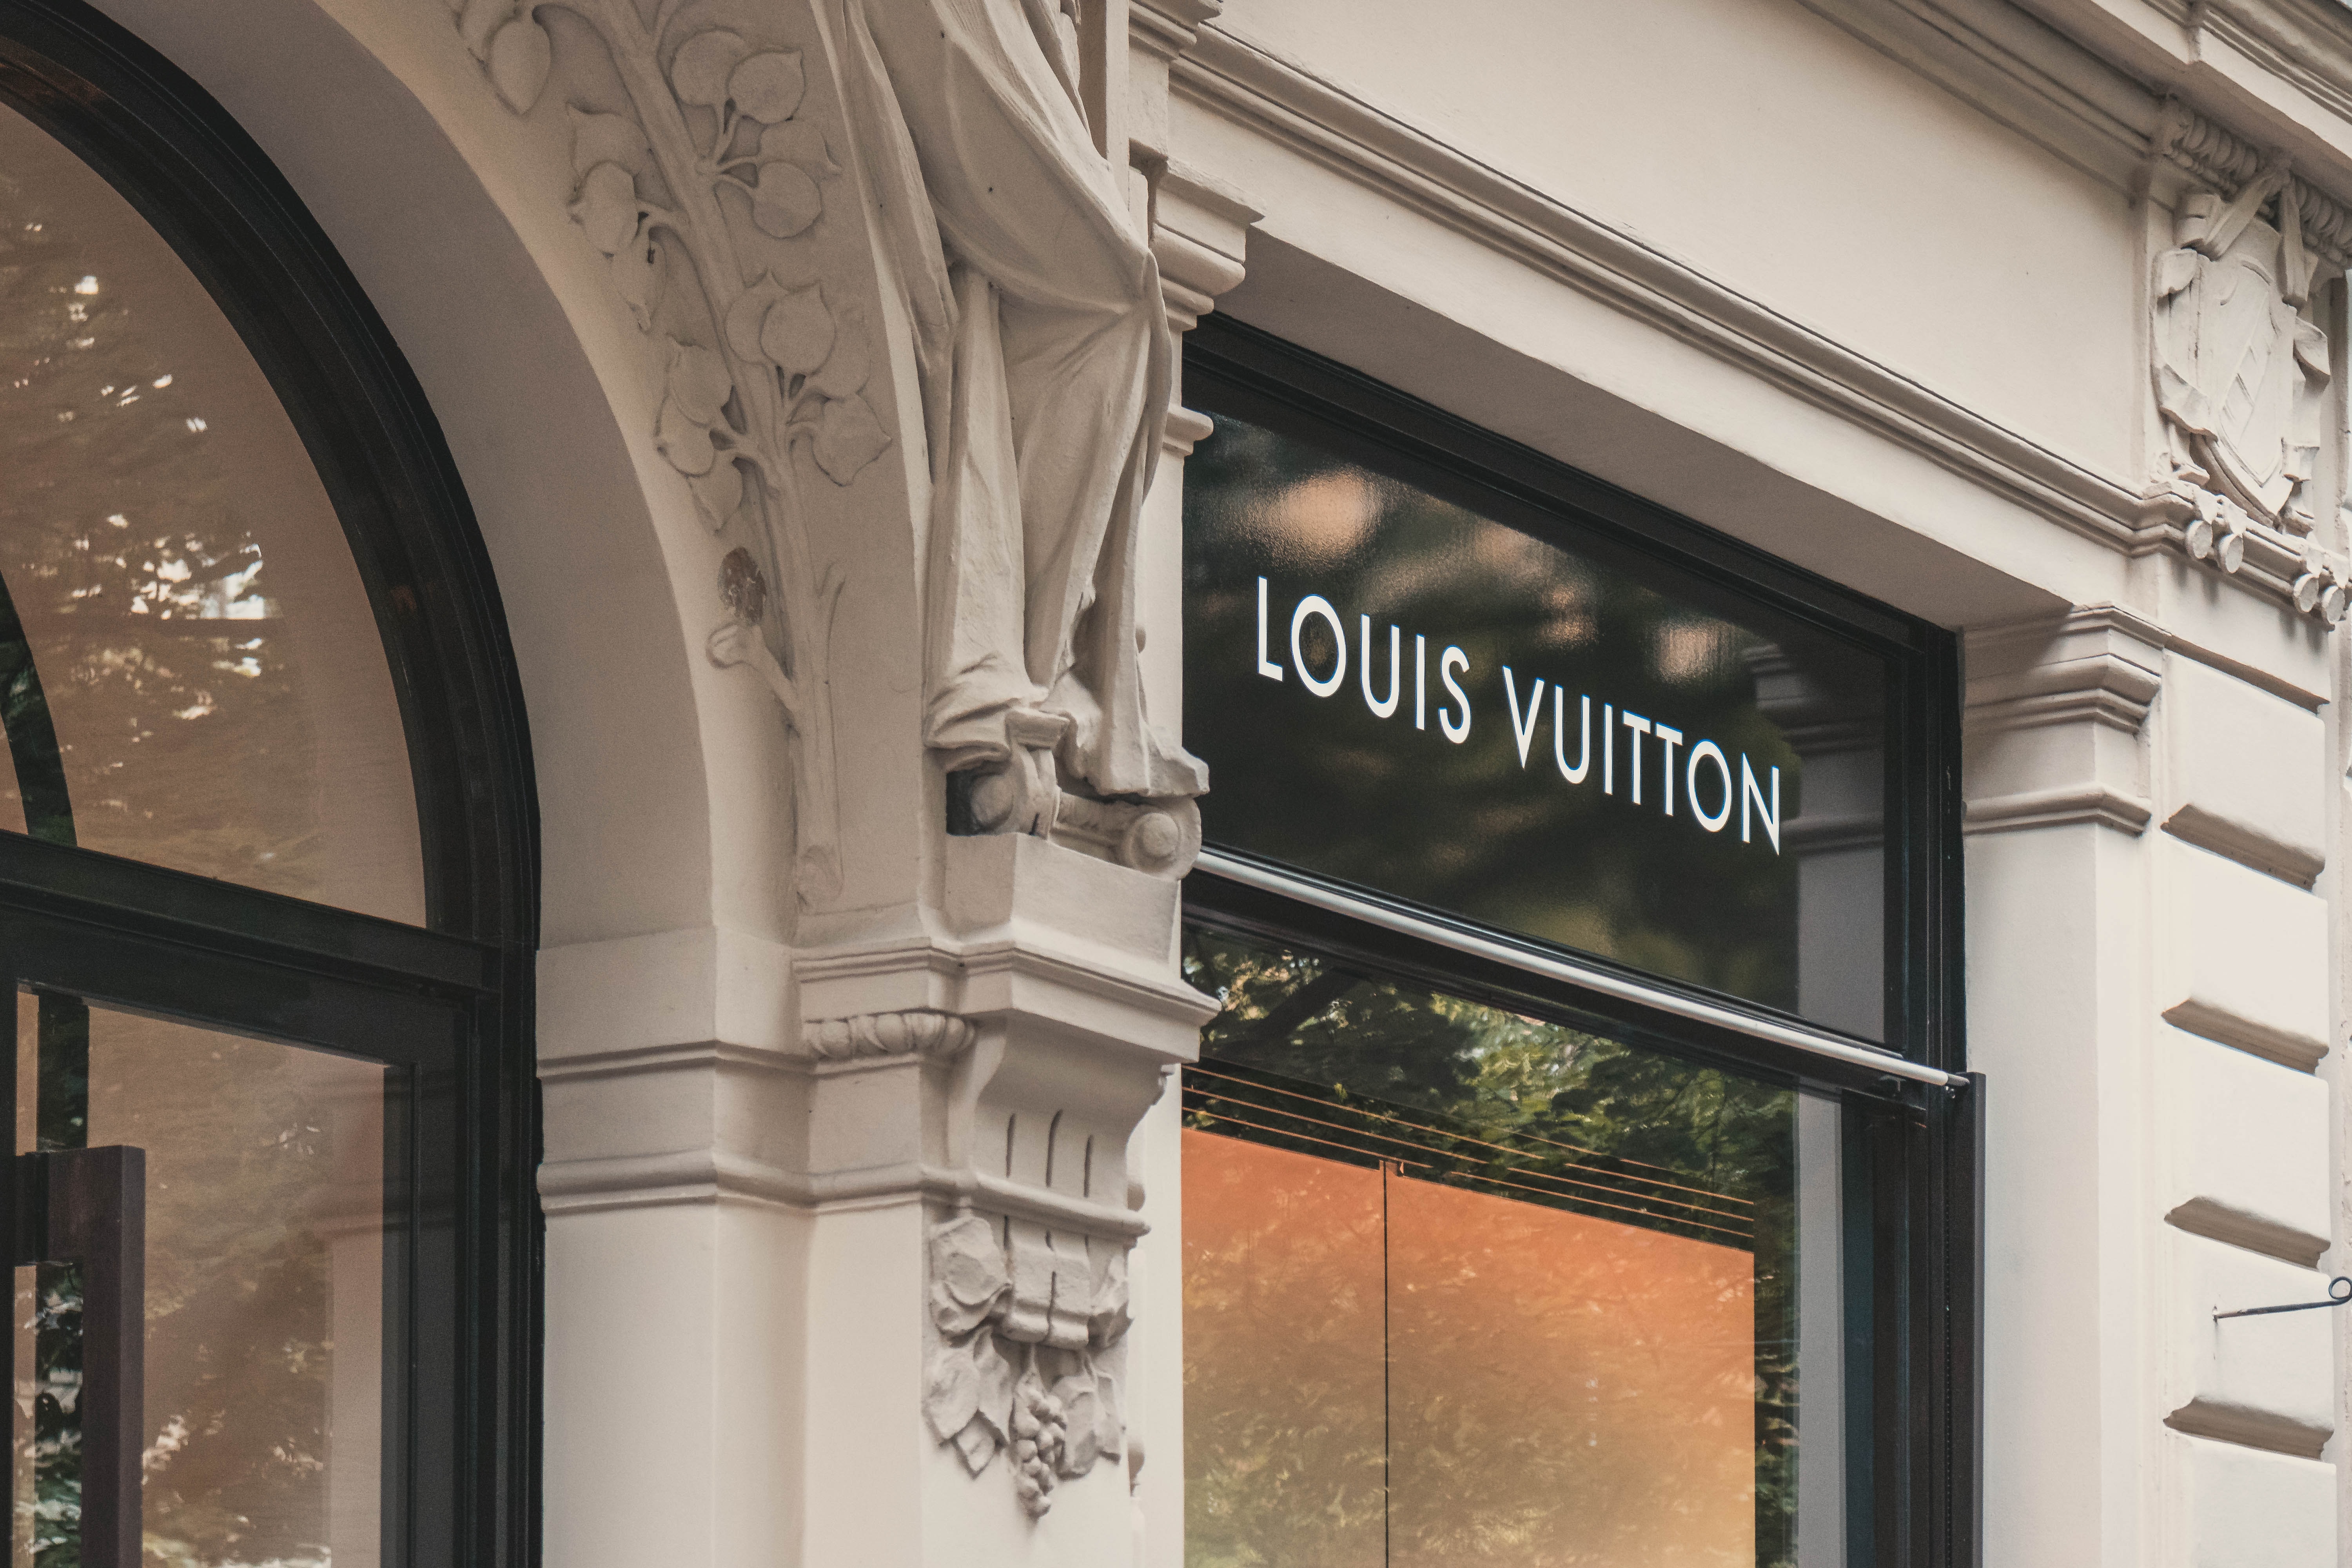 A Louis Vuitton storefront with a closeup on the brand name.